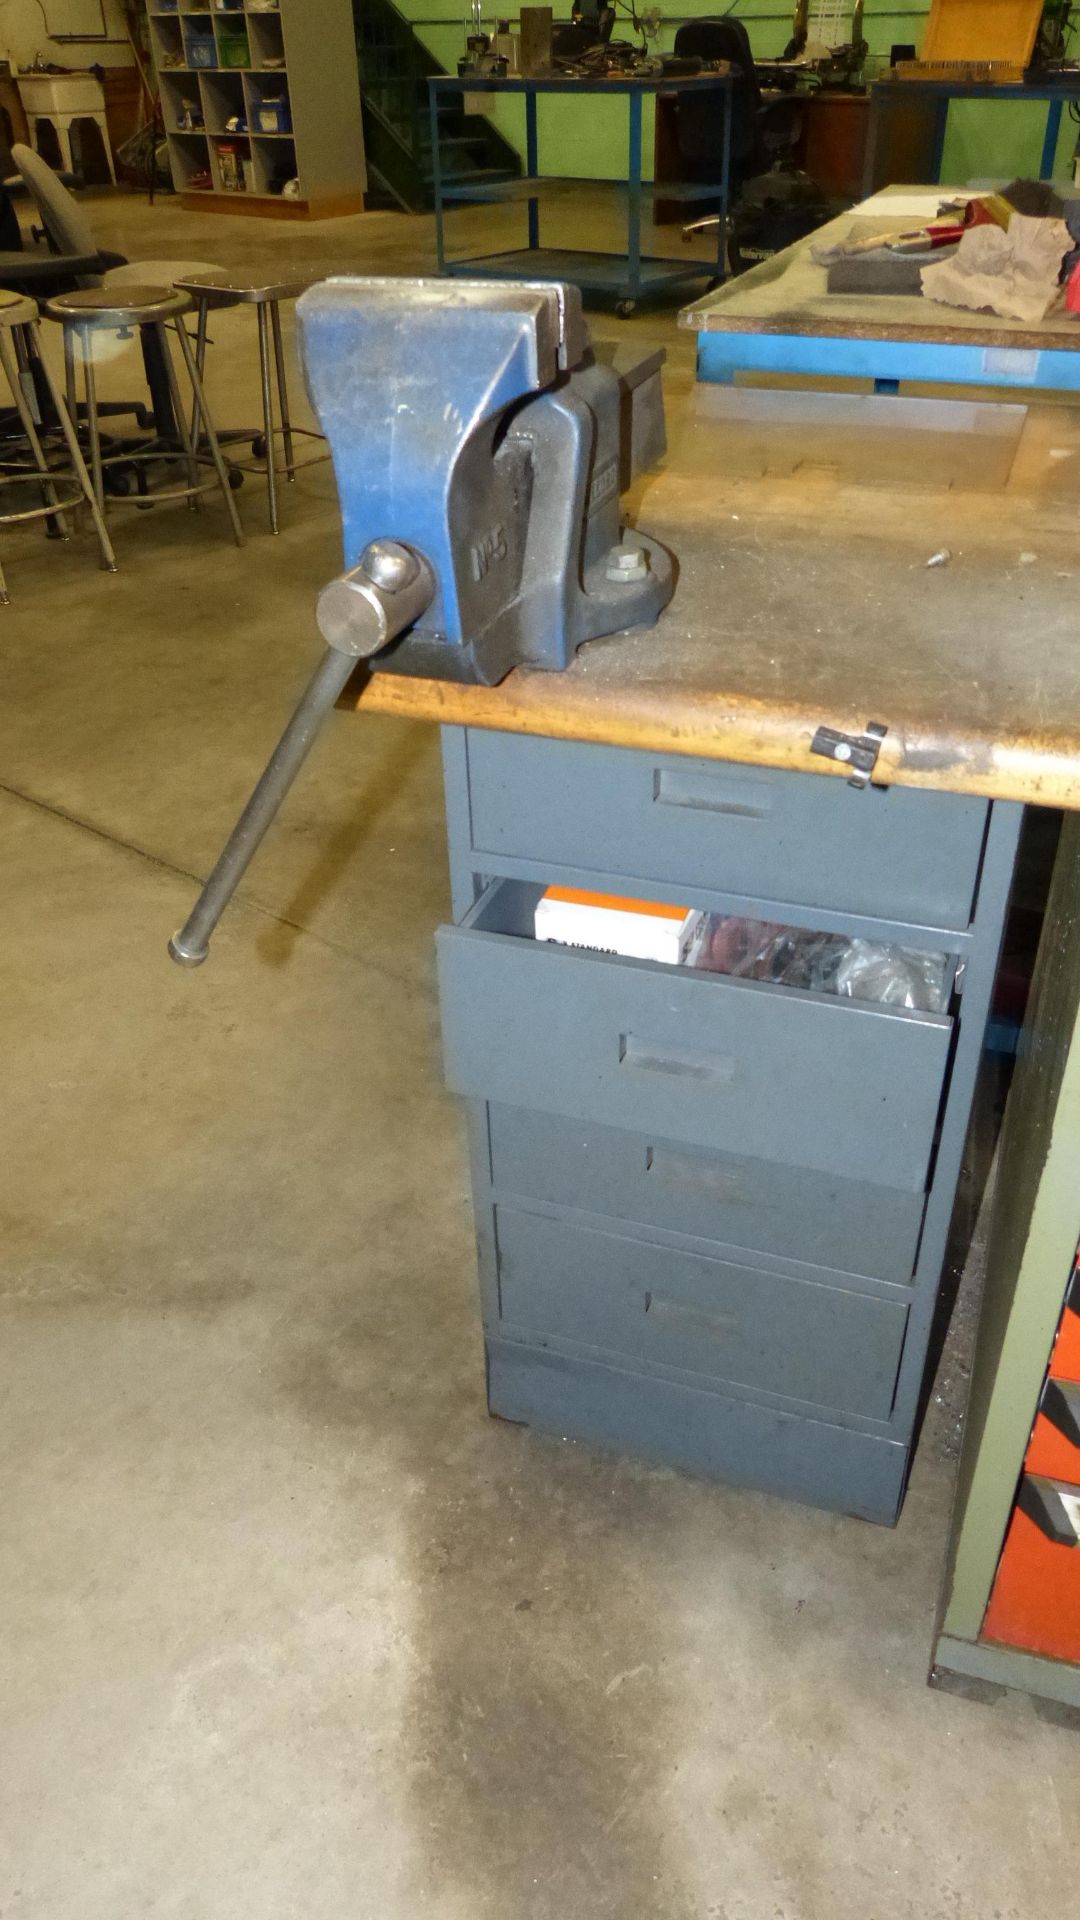 WOOD TOP SHOP TABLE W/METAL BASE, CABINETS, AND VISE (GREEN/ORANGE CABINET NOT INCLUDED) - Image 2 of 3